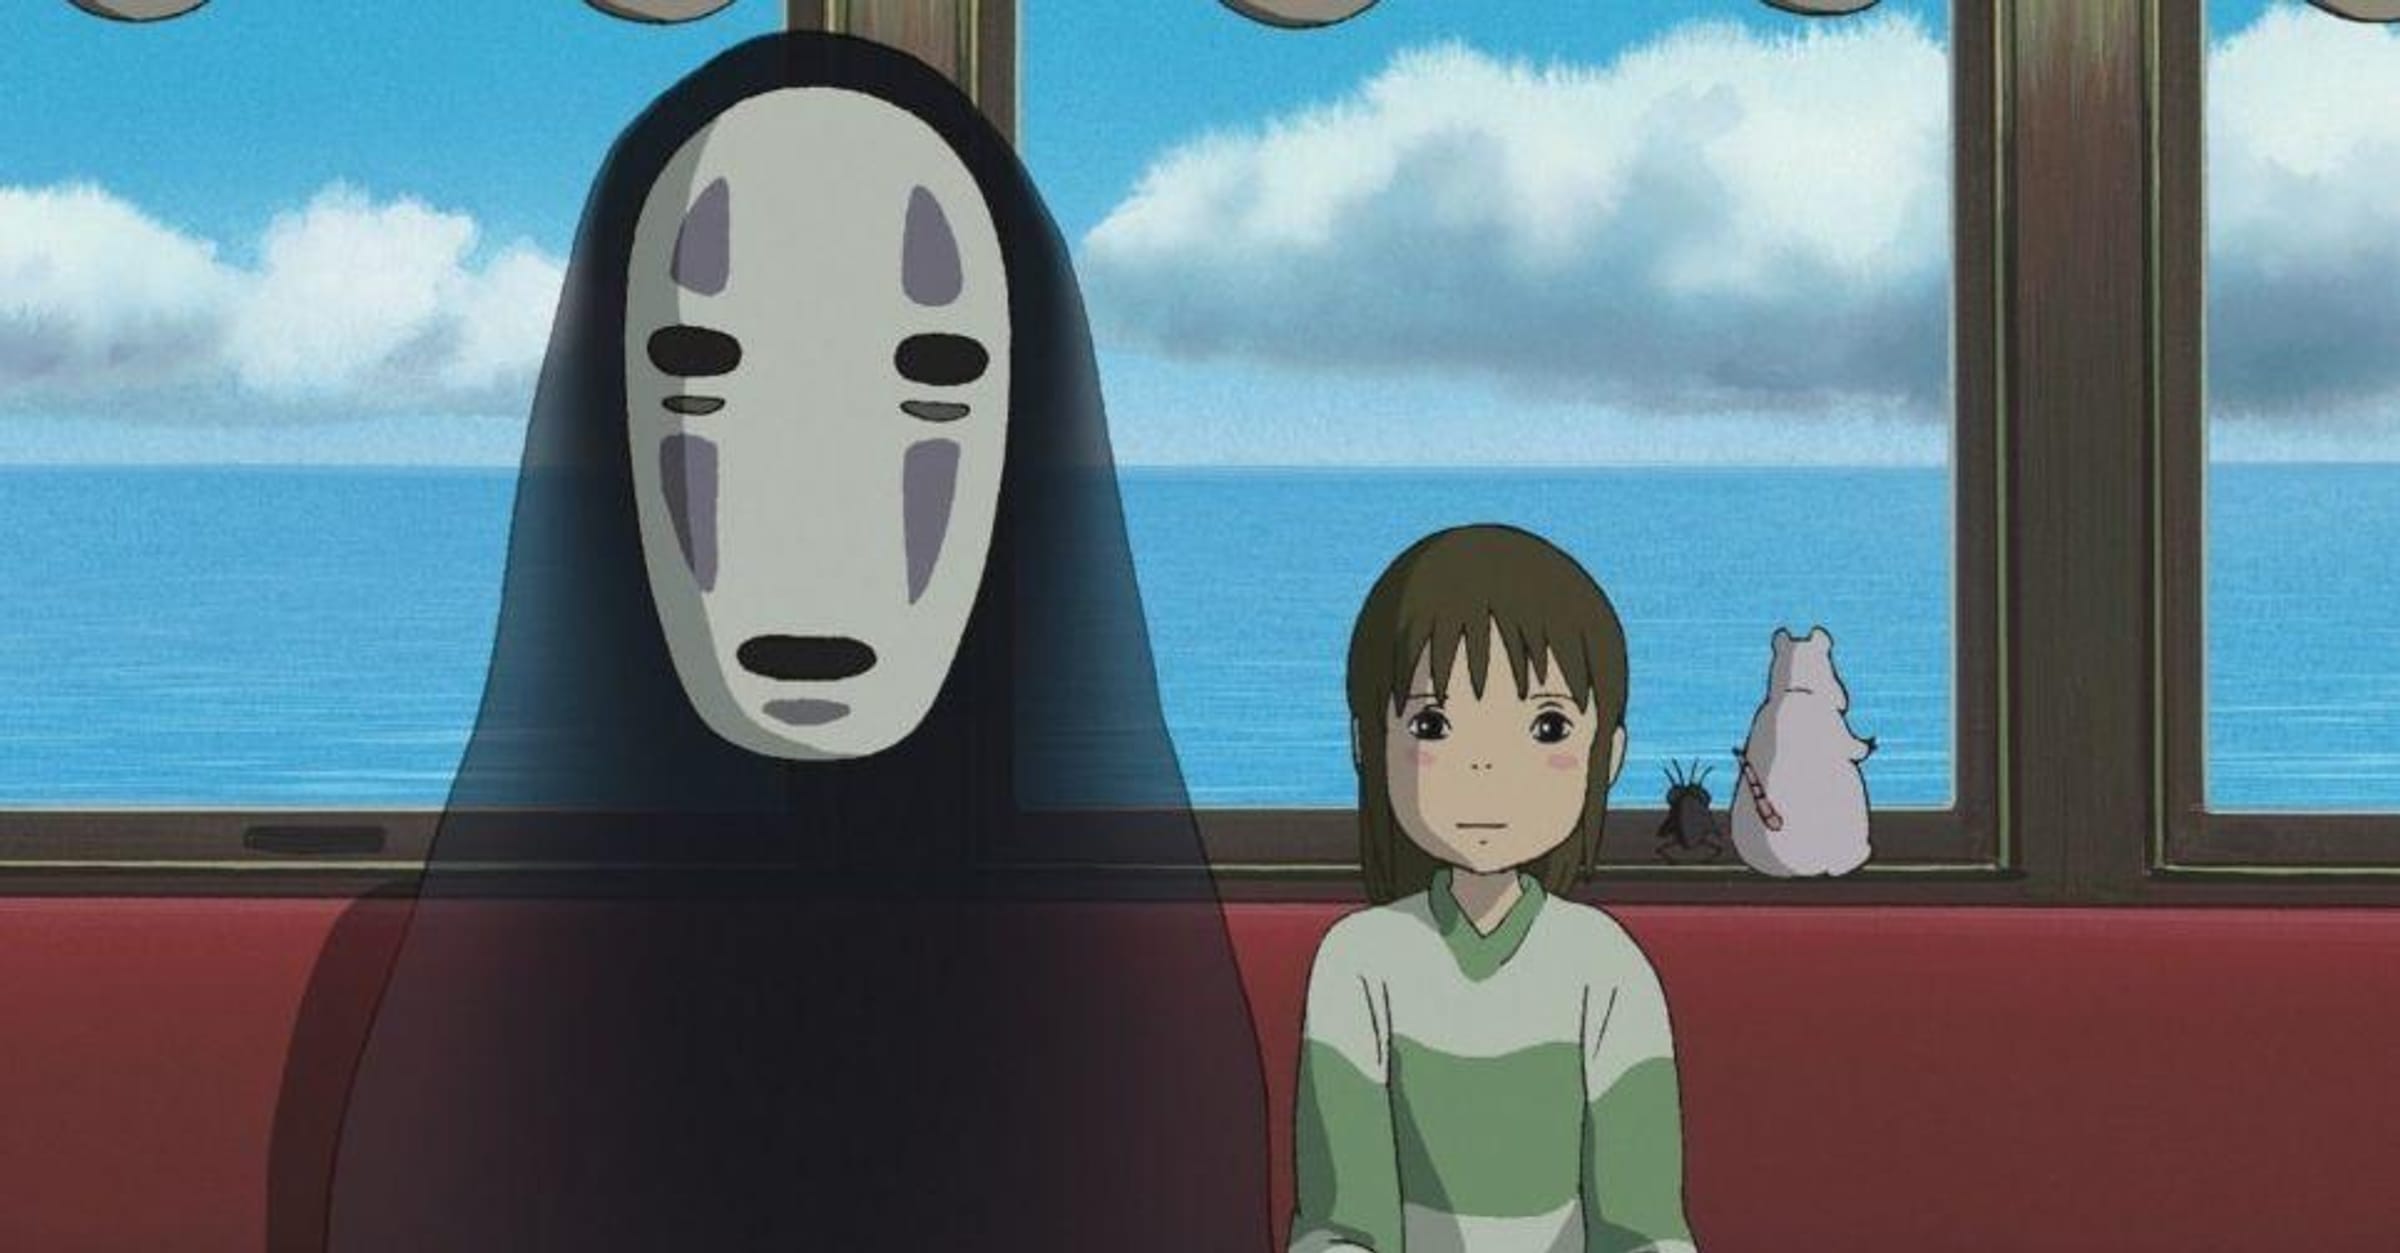 20 Small And Amazing Details Fans Spotted In Studio Ghibli Movies